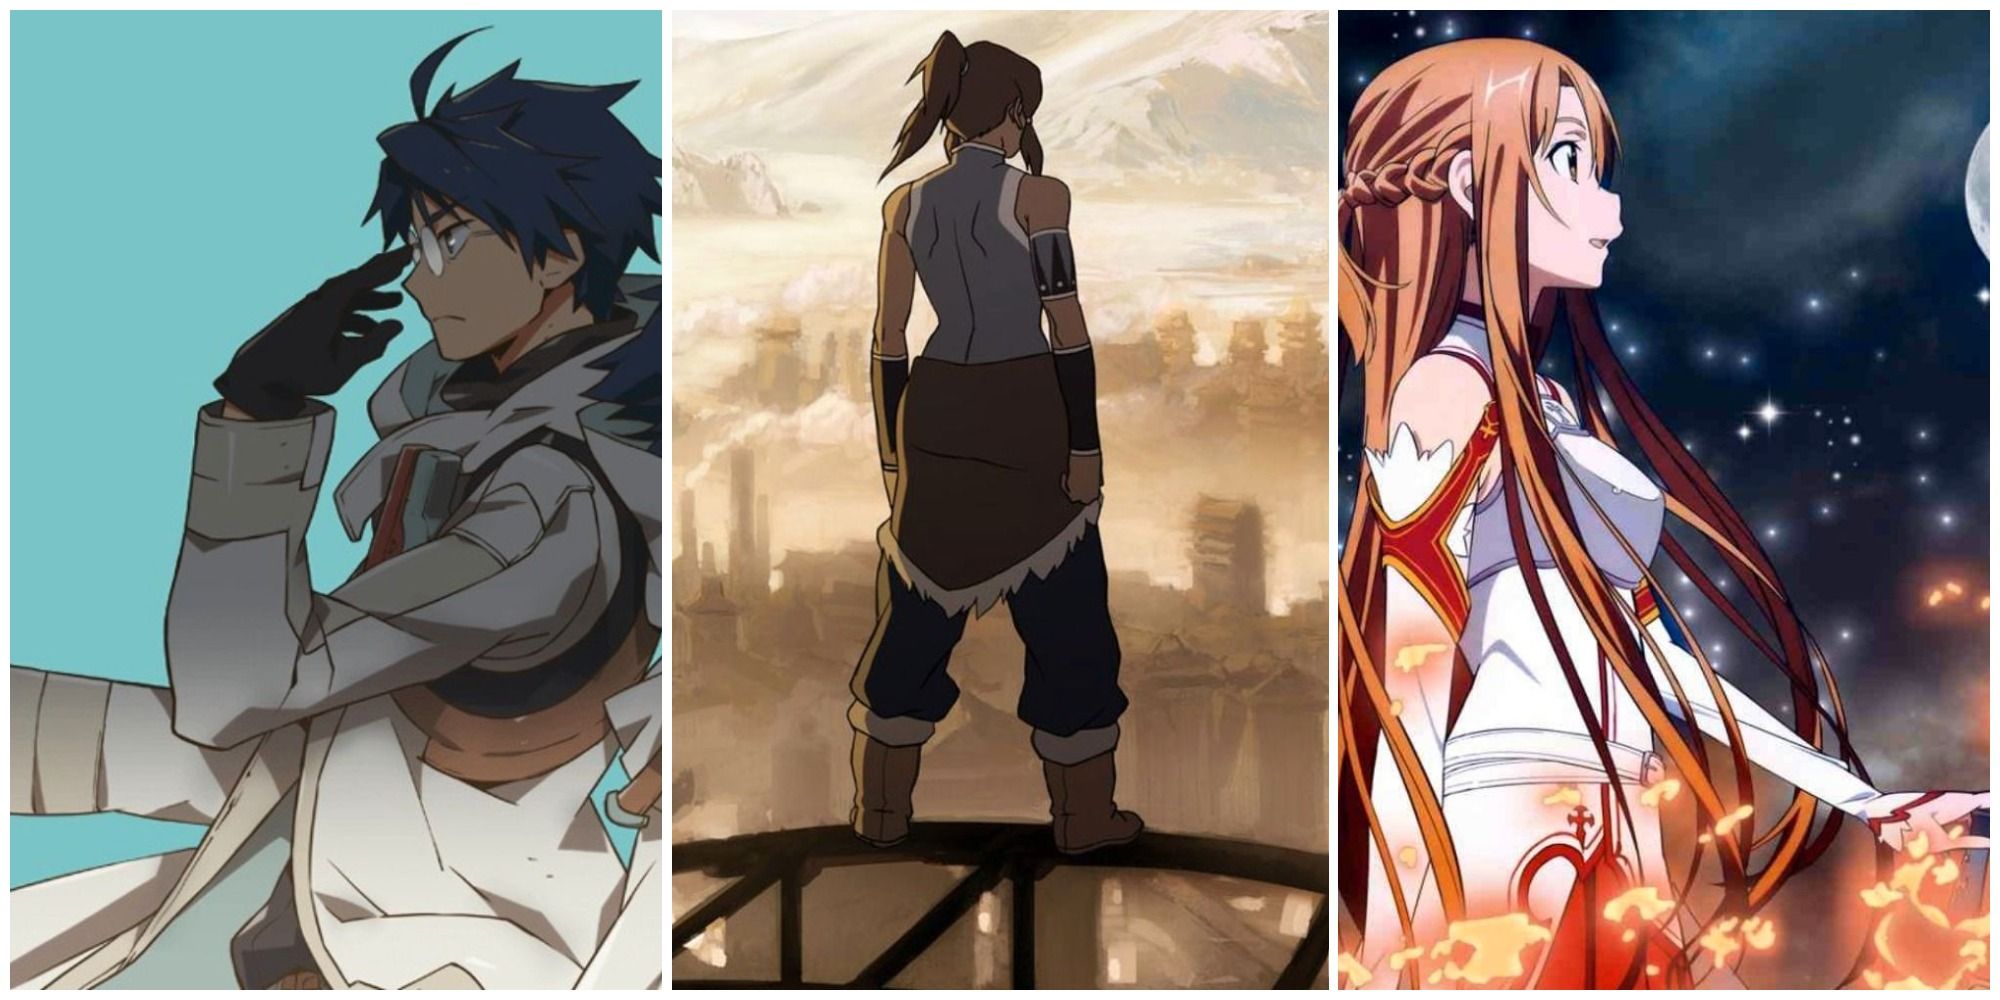 25 Fantasy Romance Anime With Whimsical Settings | Recommend Me Anime